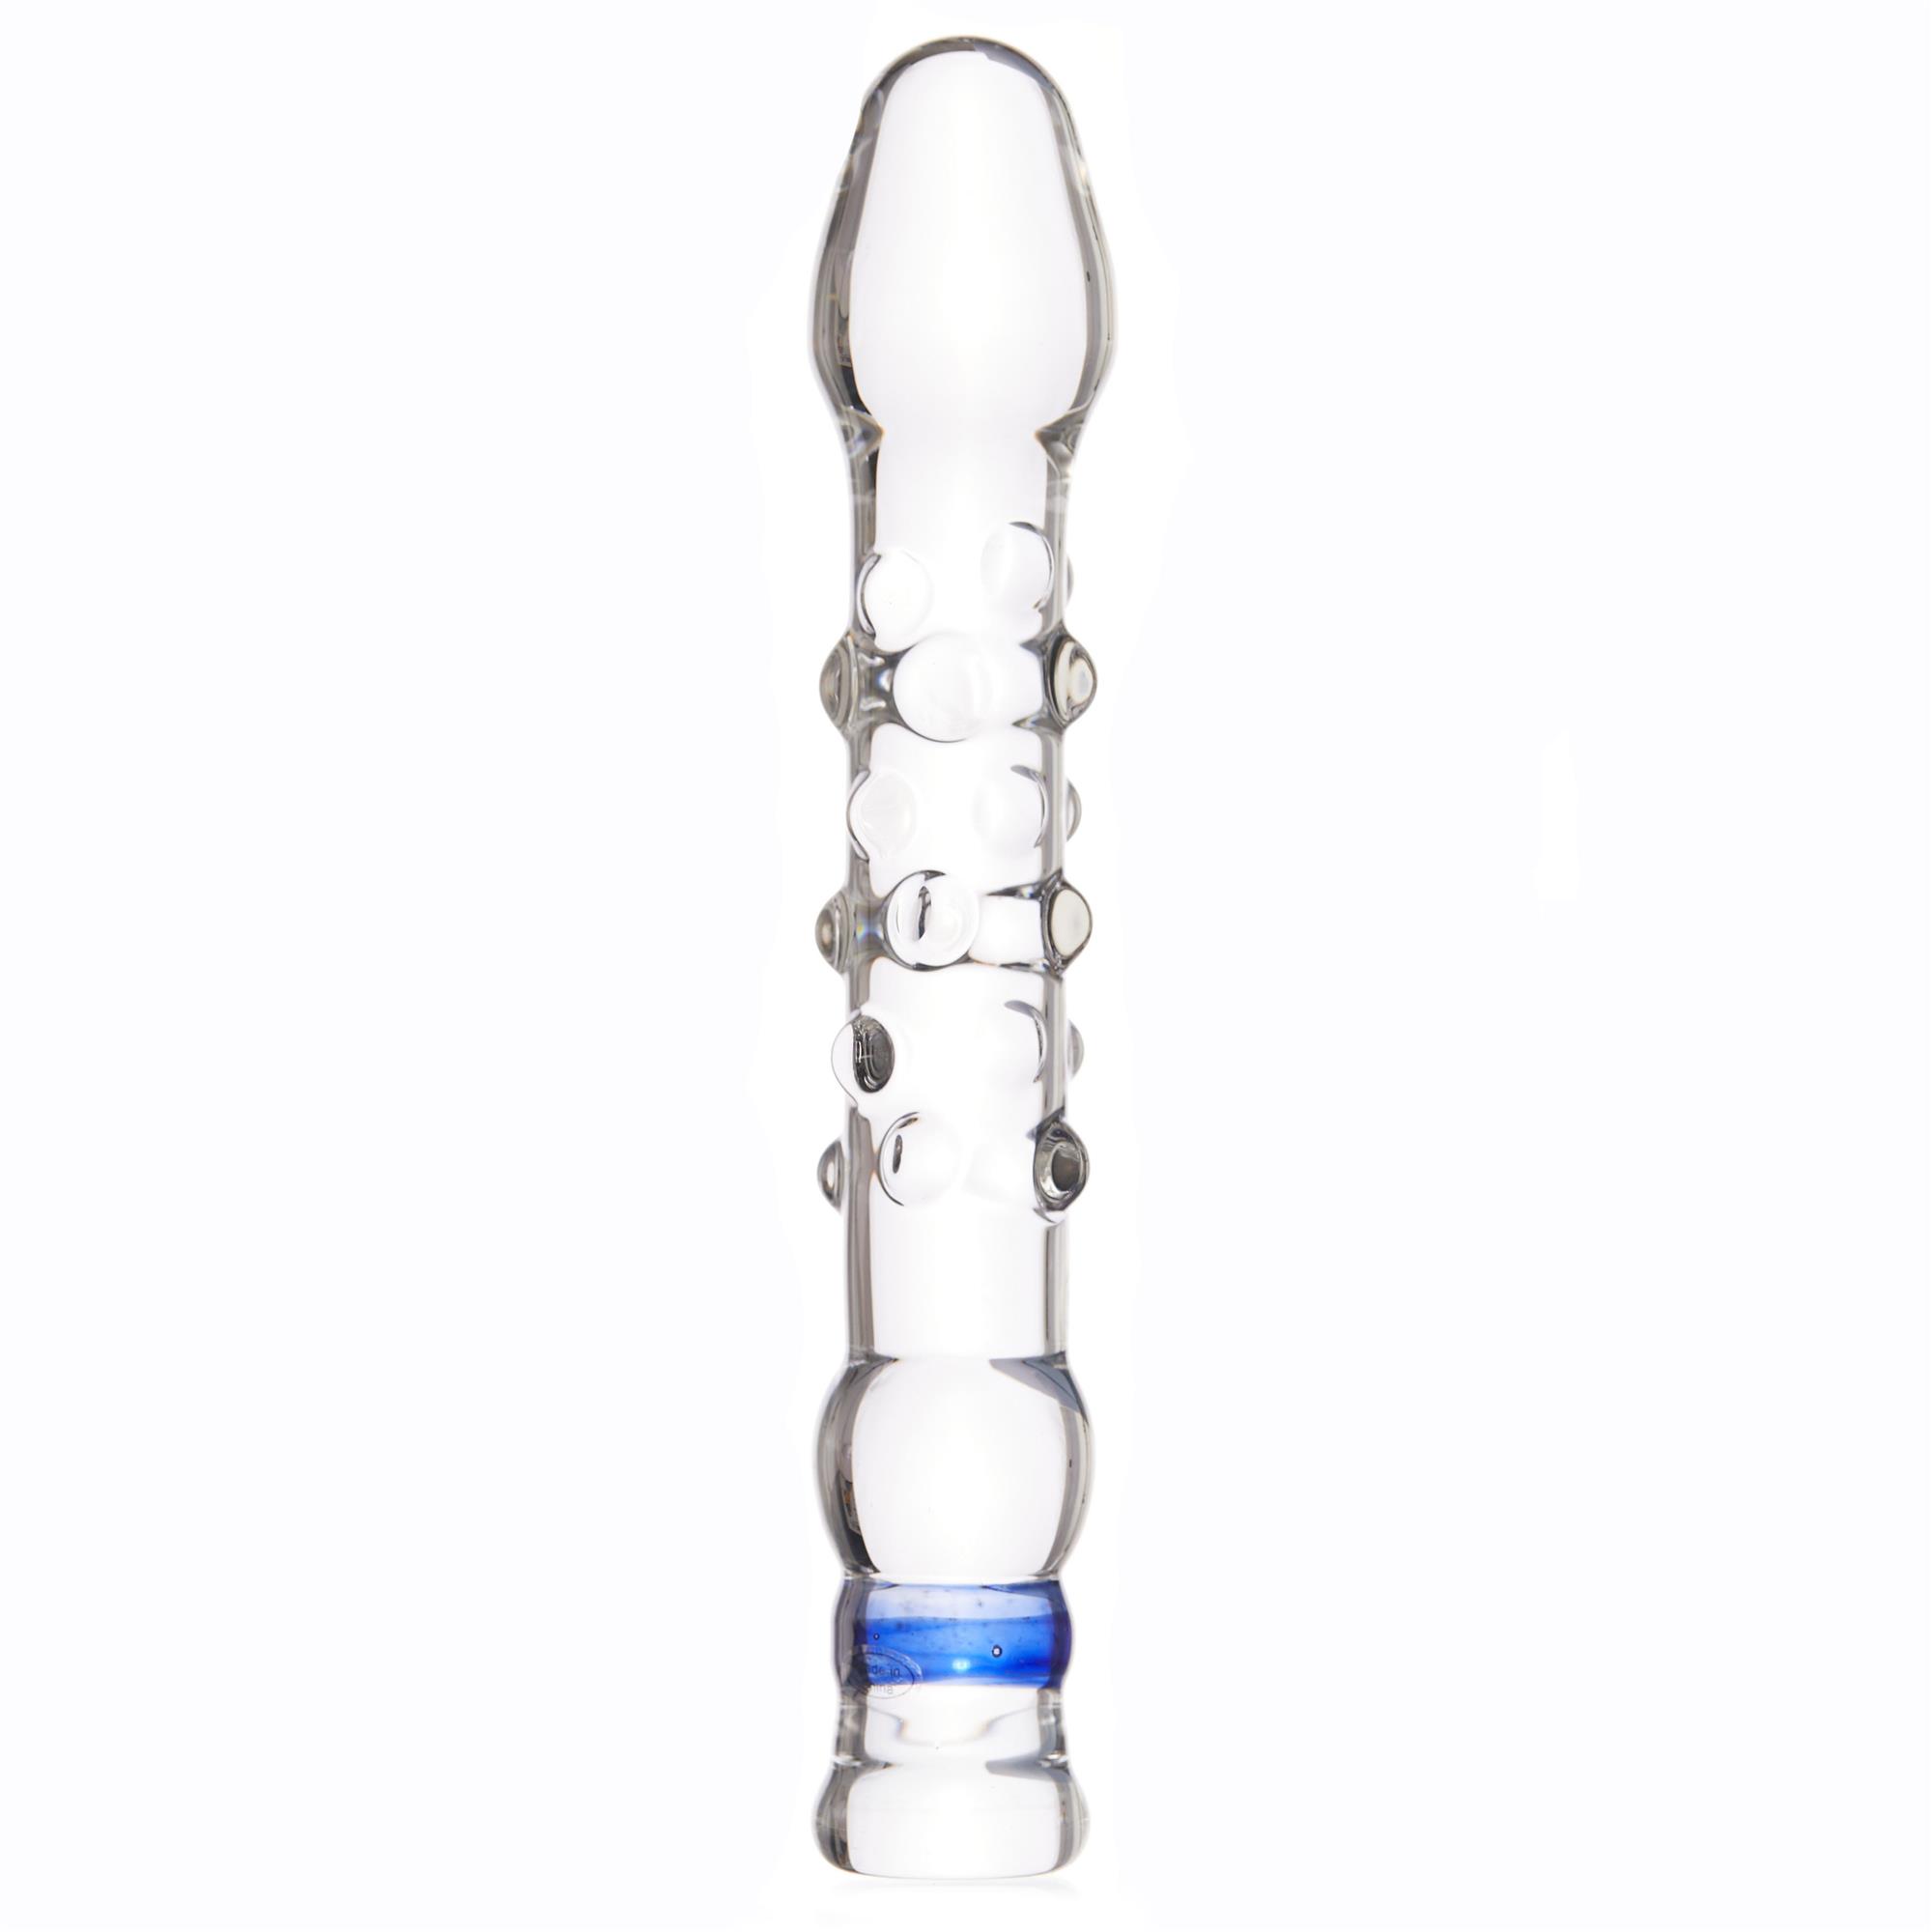 THE DON WAND GLASS DILDO